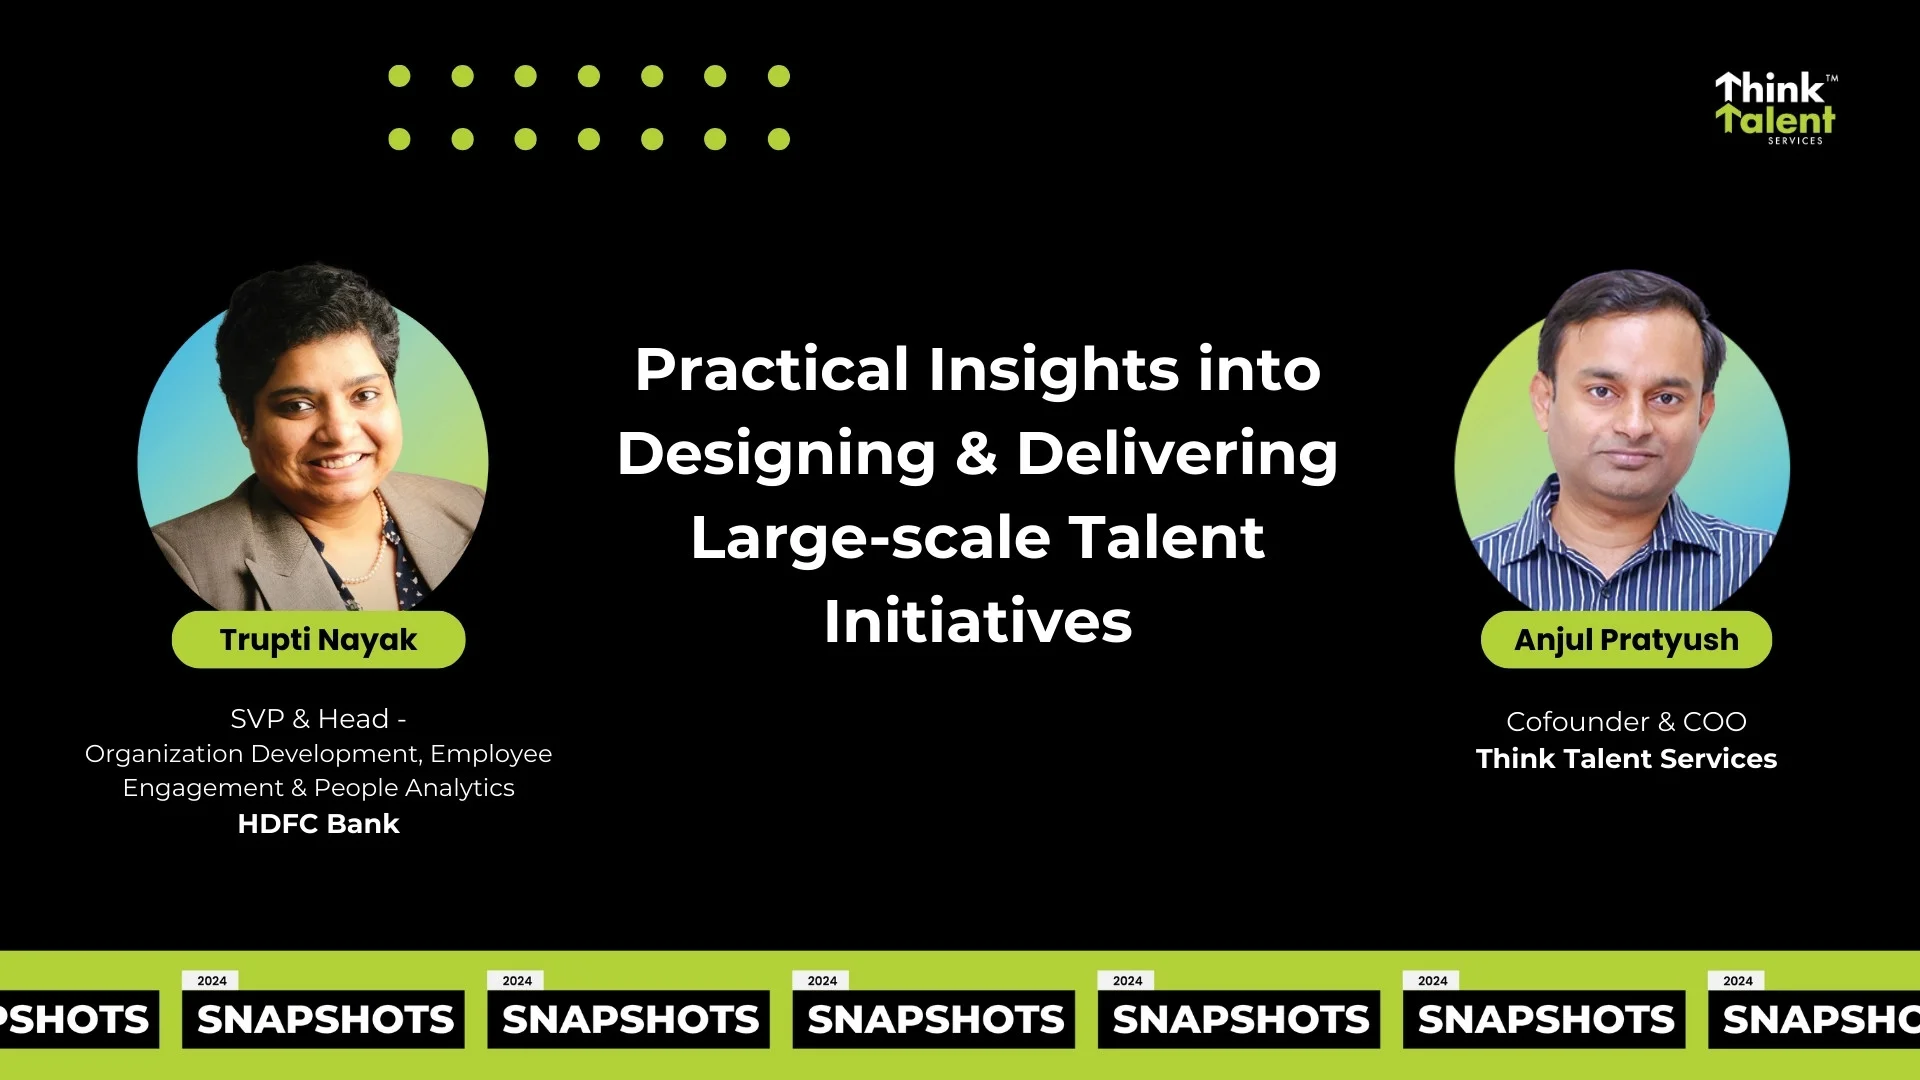 Practical Insights into Designing & Delivering Large-scale Talent Initiatives